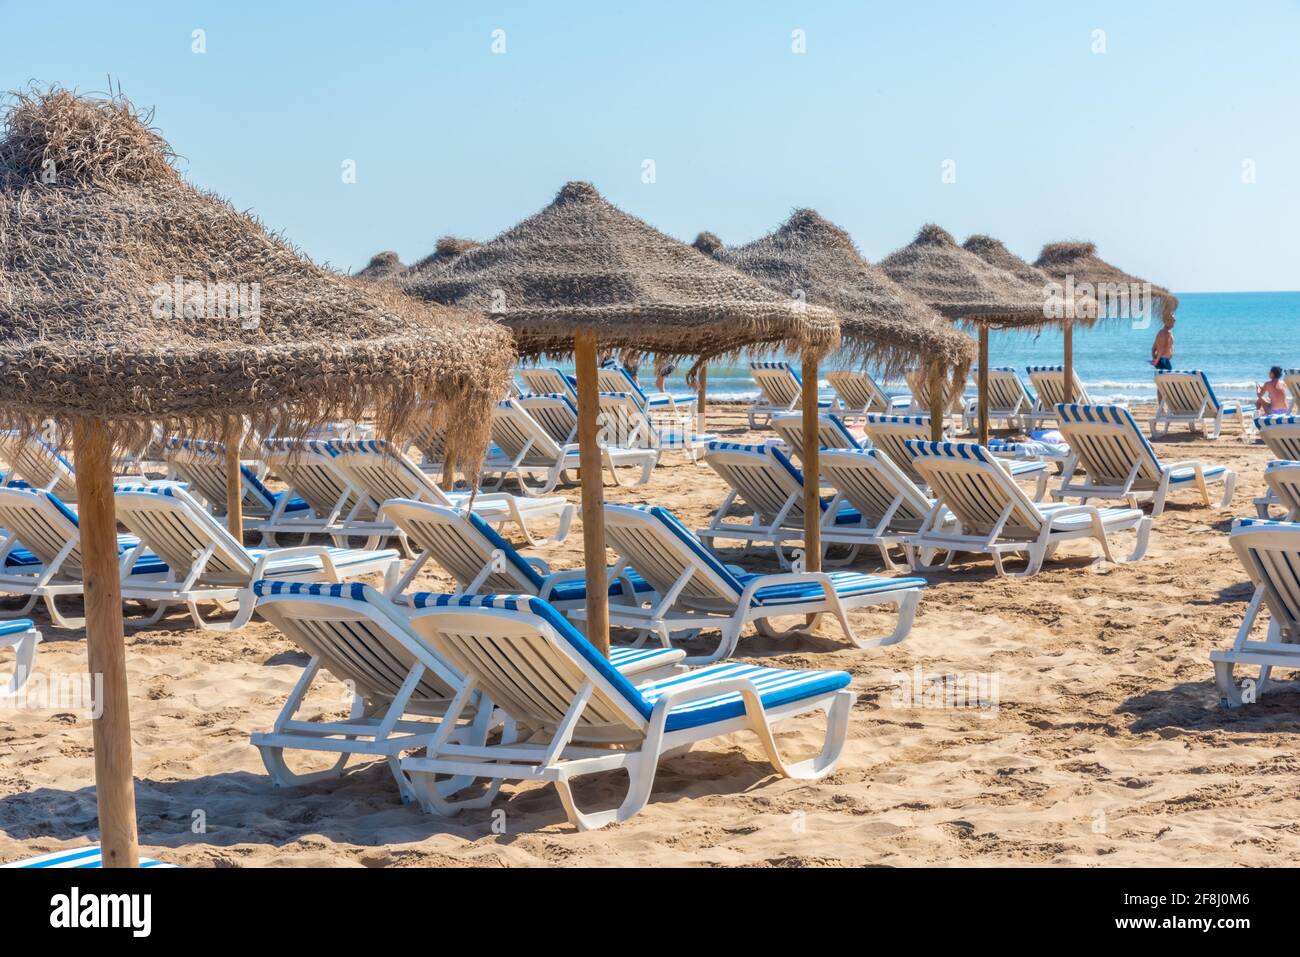 Sunbeds and umbrellas on a beach in Valencia, Spain Stock Photo